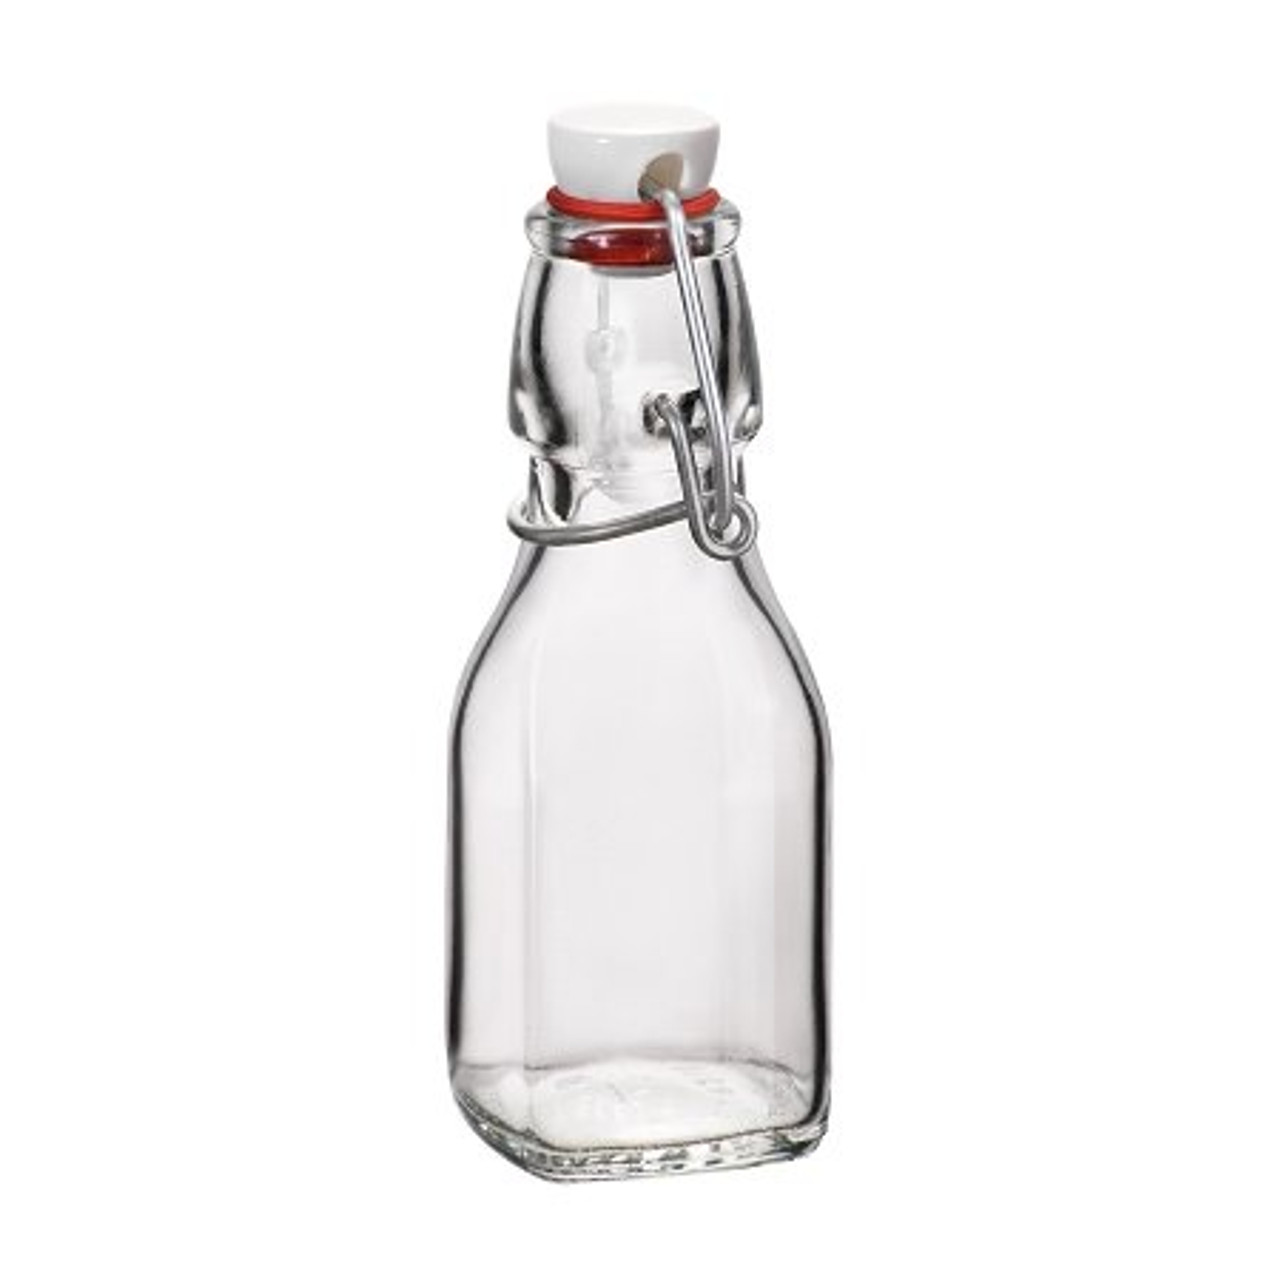 Bormioli Rocco Giara 33.75oz (1L) Swing Top Glass Bottles | Multiple Colors  Available